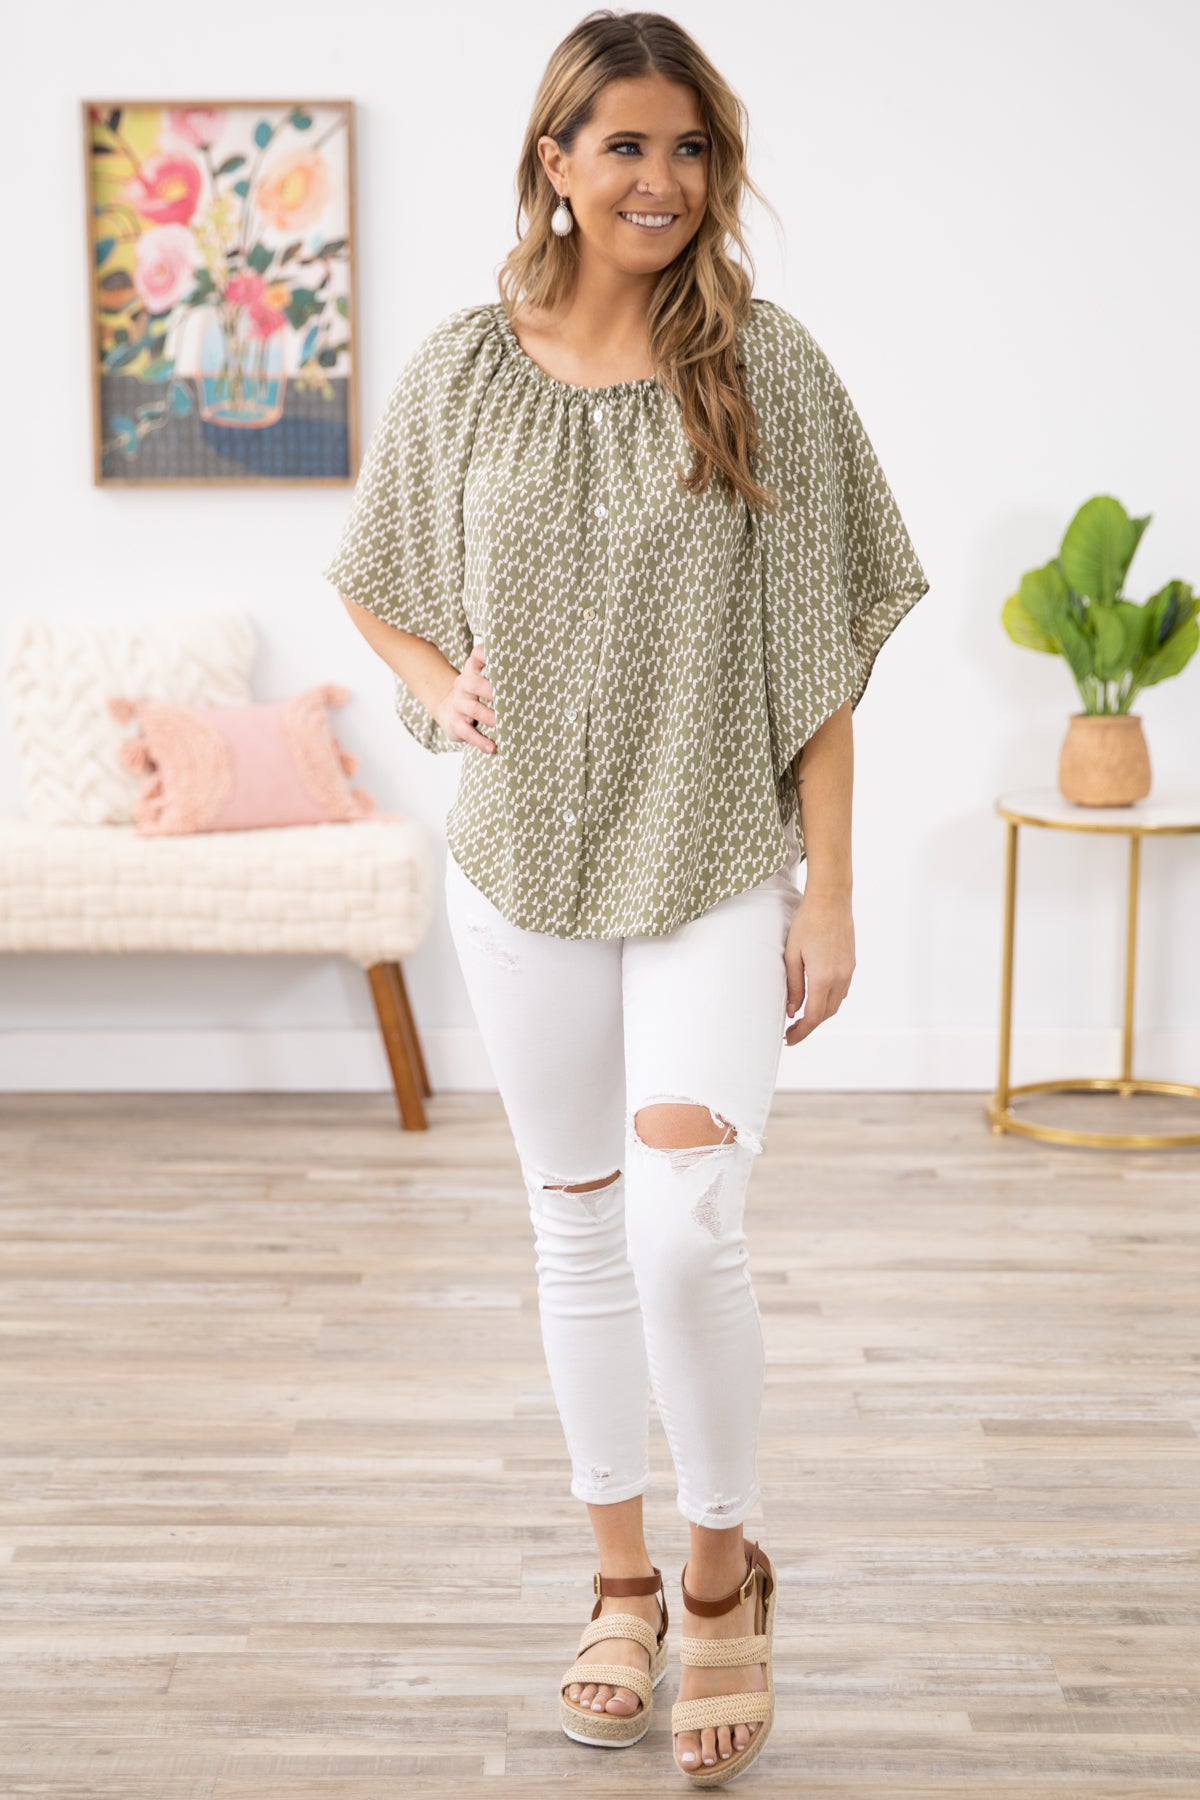 Olive Geometric Print Off the Shoulder Top - Filly Flair